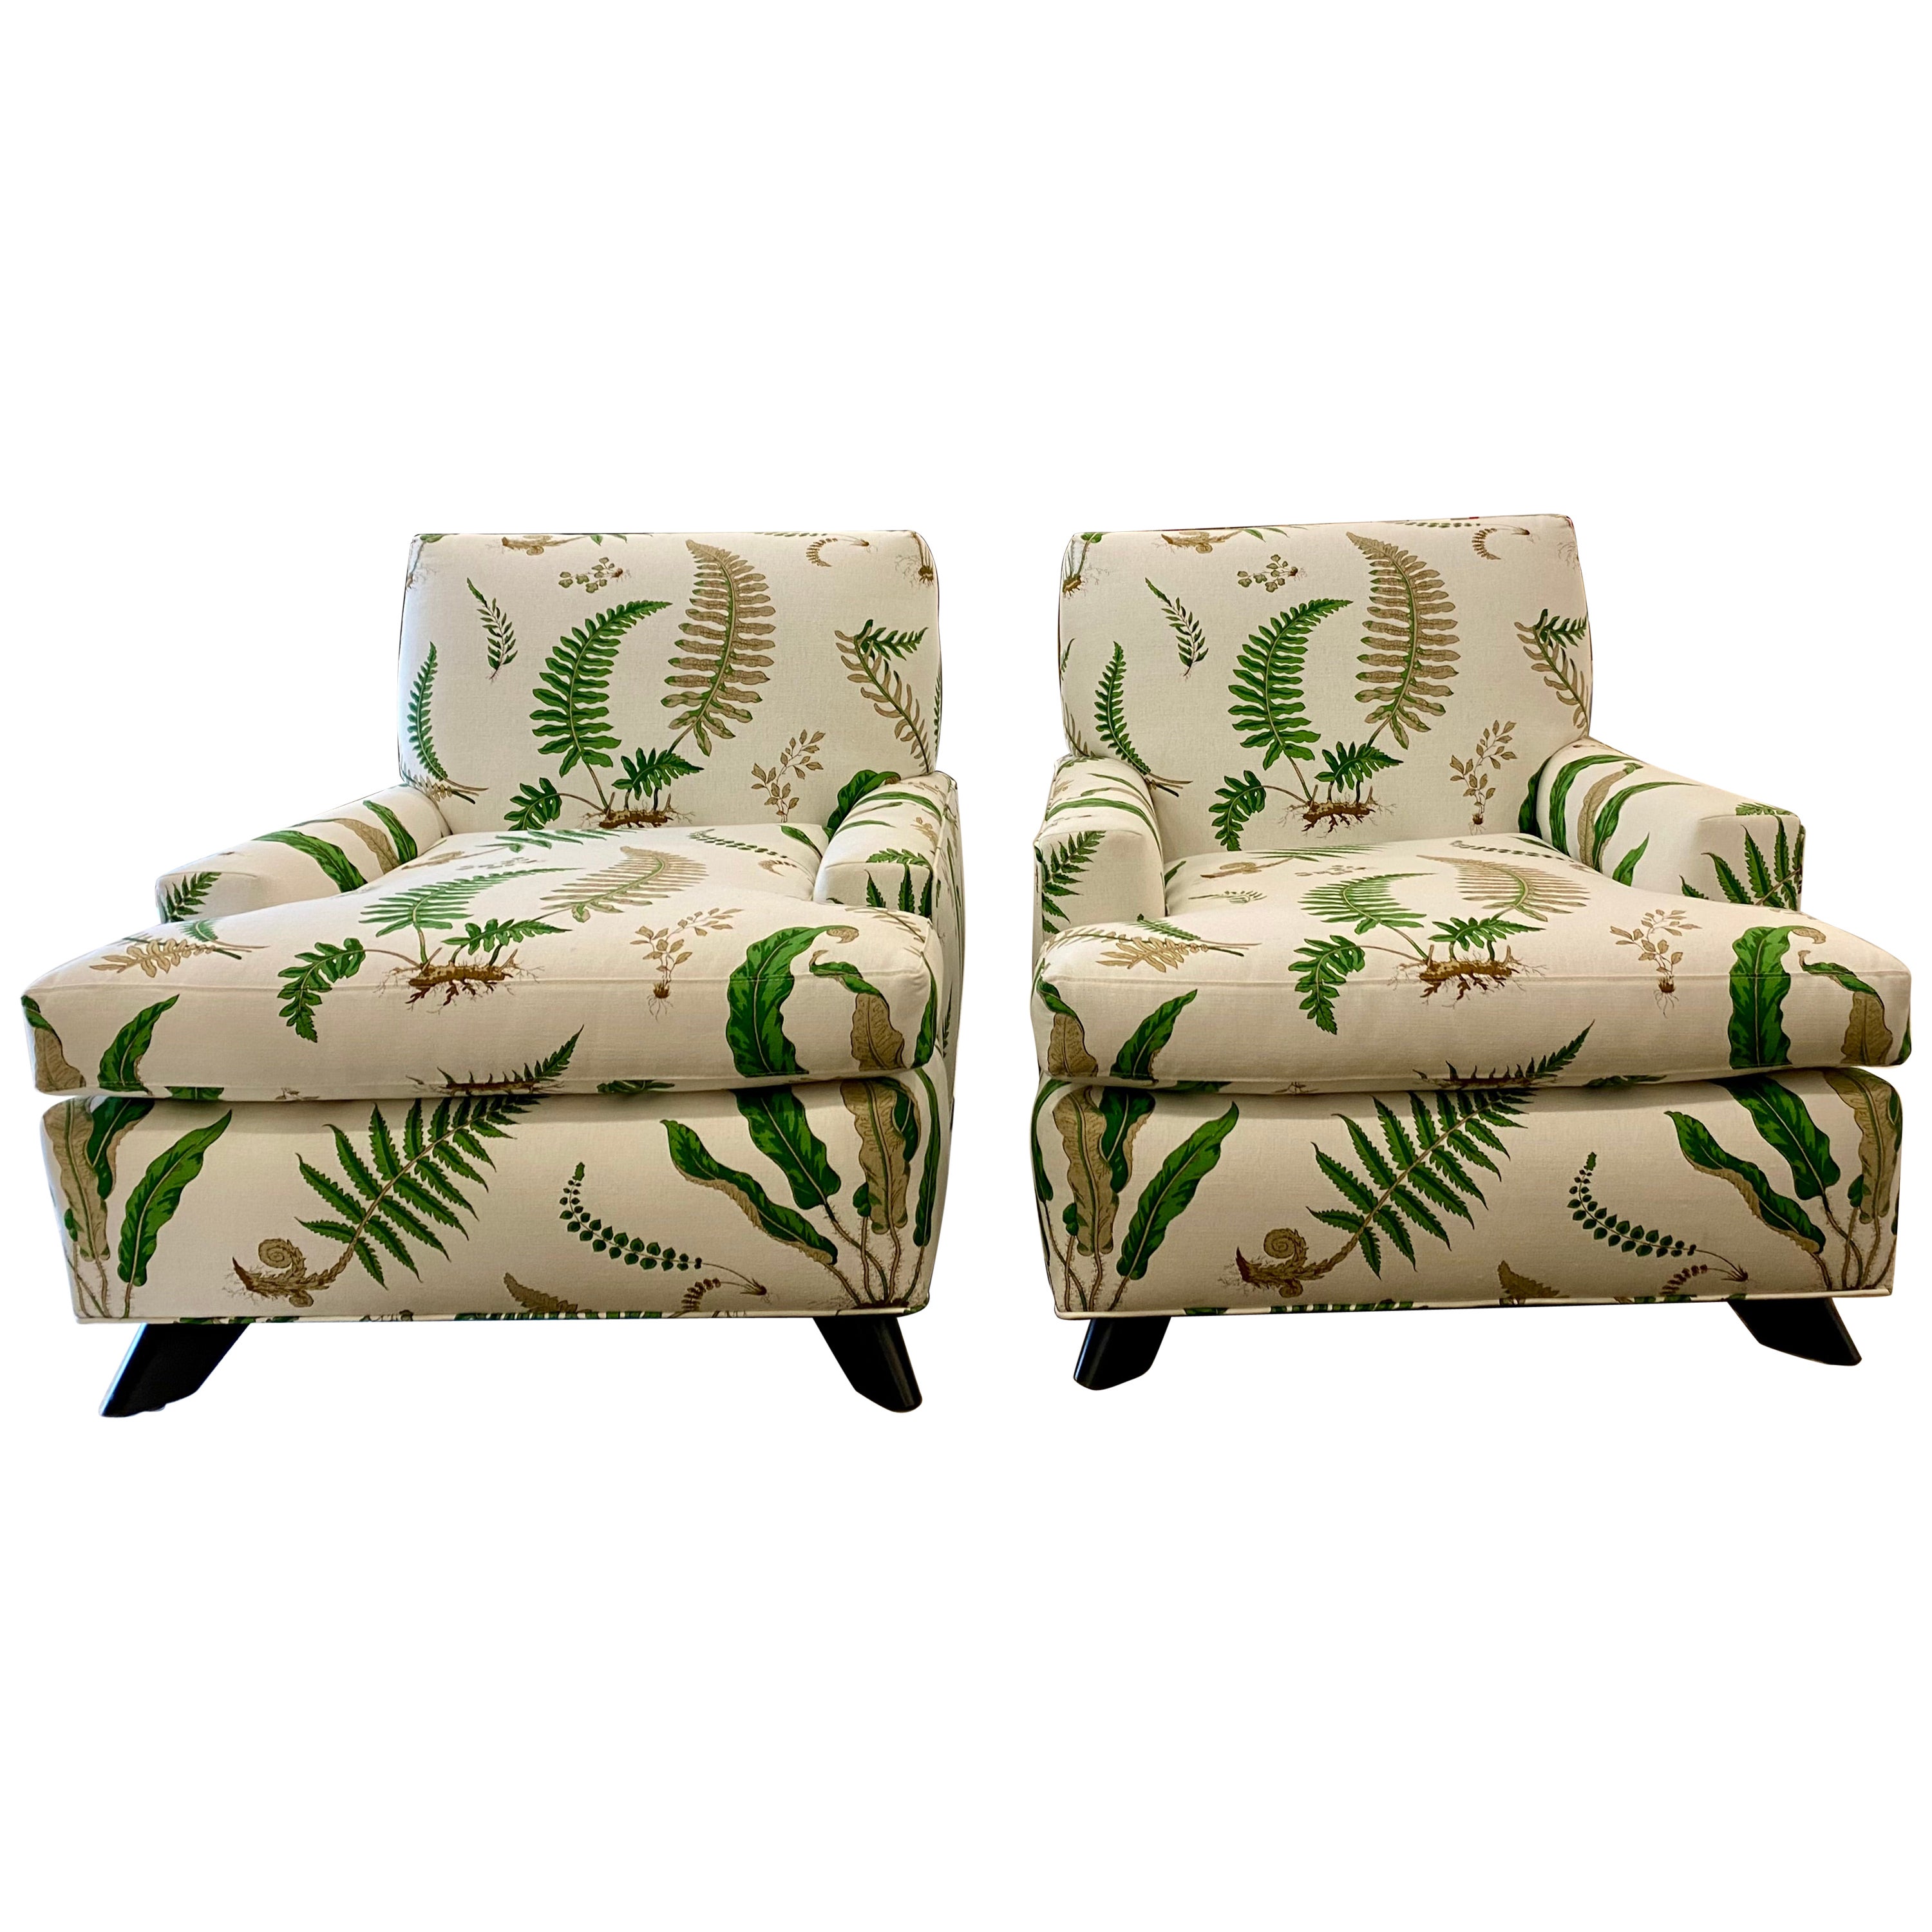 Pair of  Ledgeback Seniah Chairs by Billy Haines